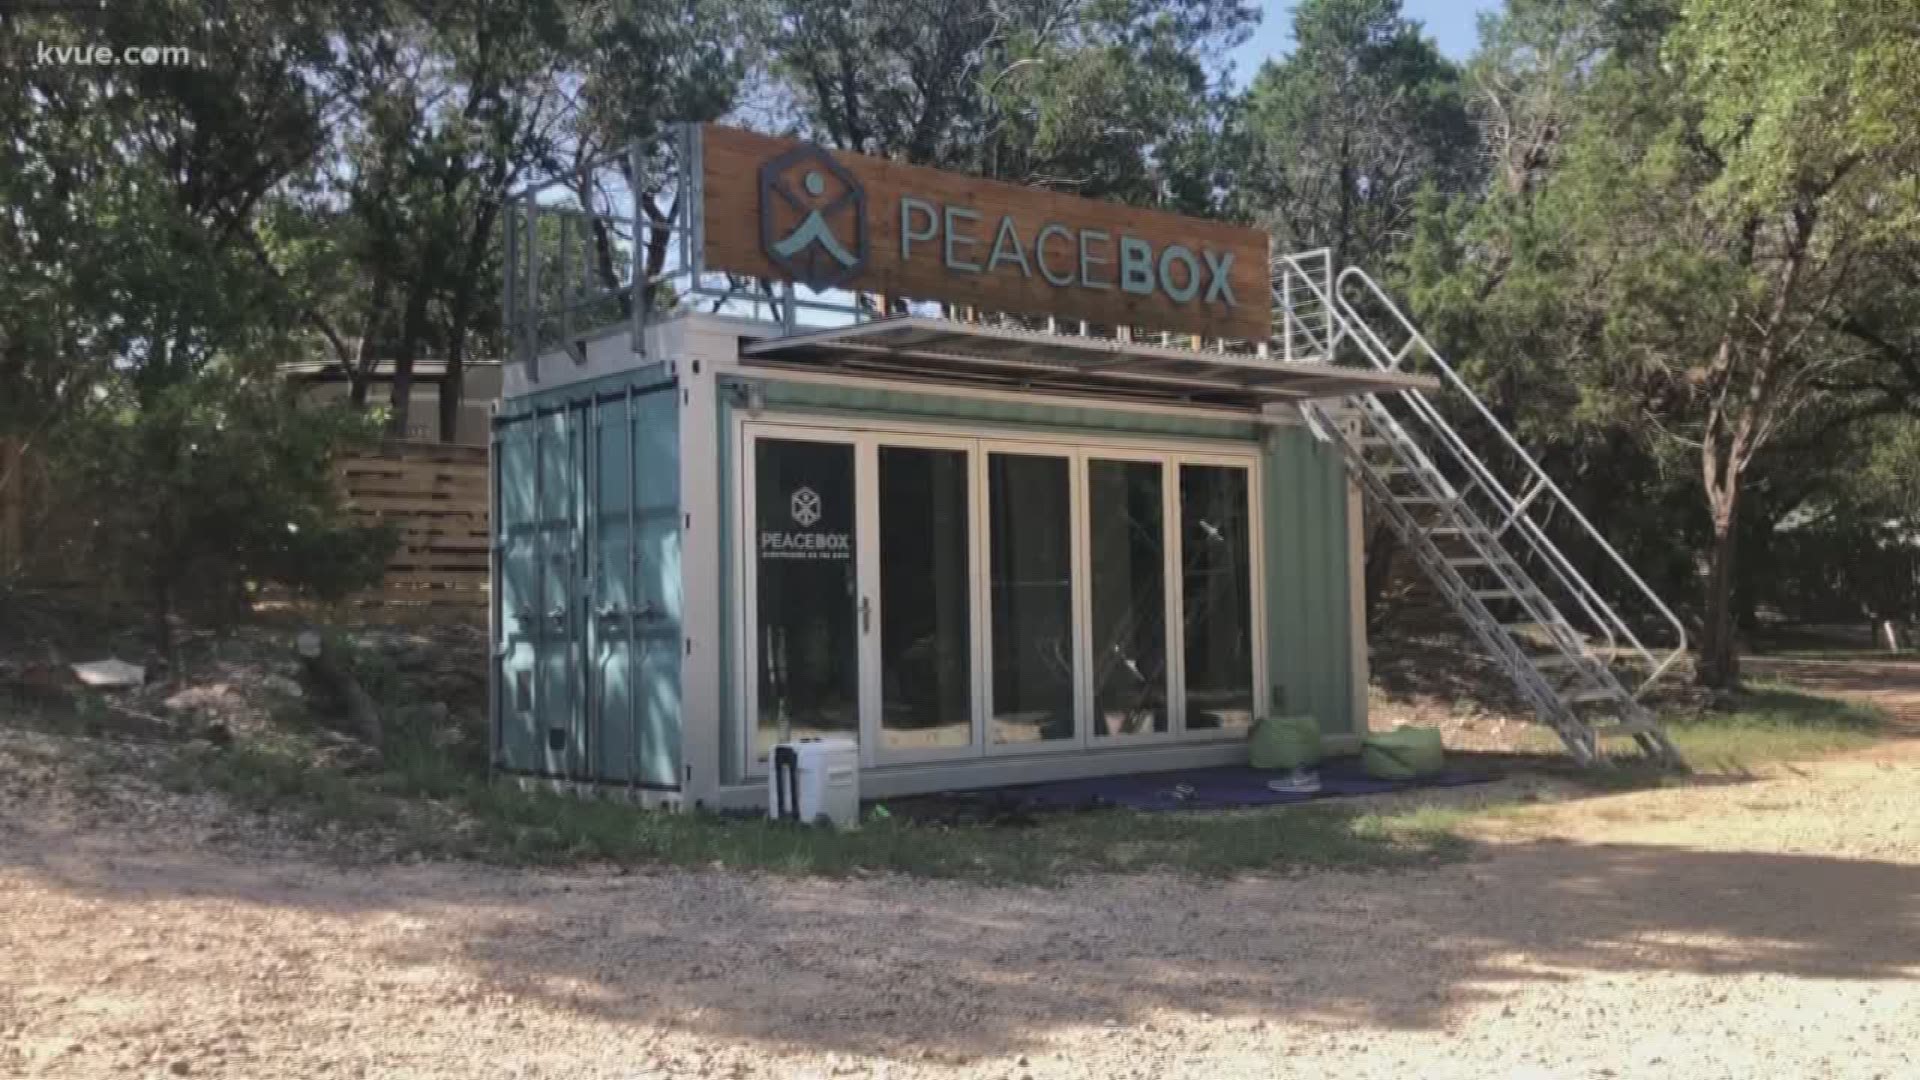 Peacebox is a mobile meditation studio made from a refurbished shipping container.